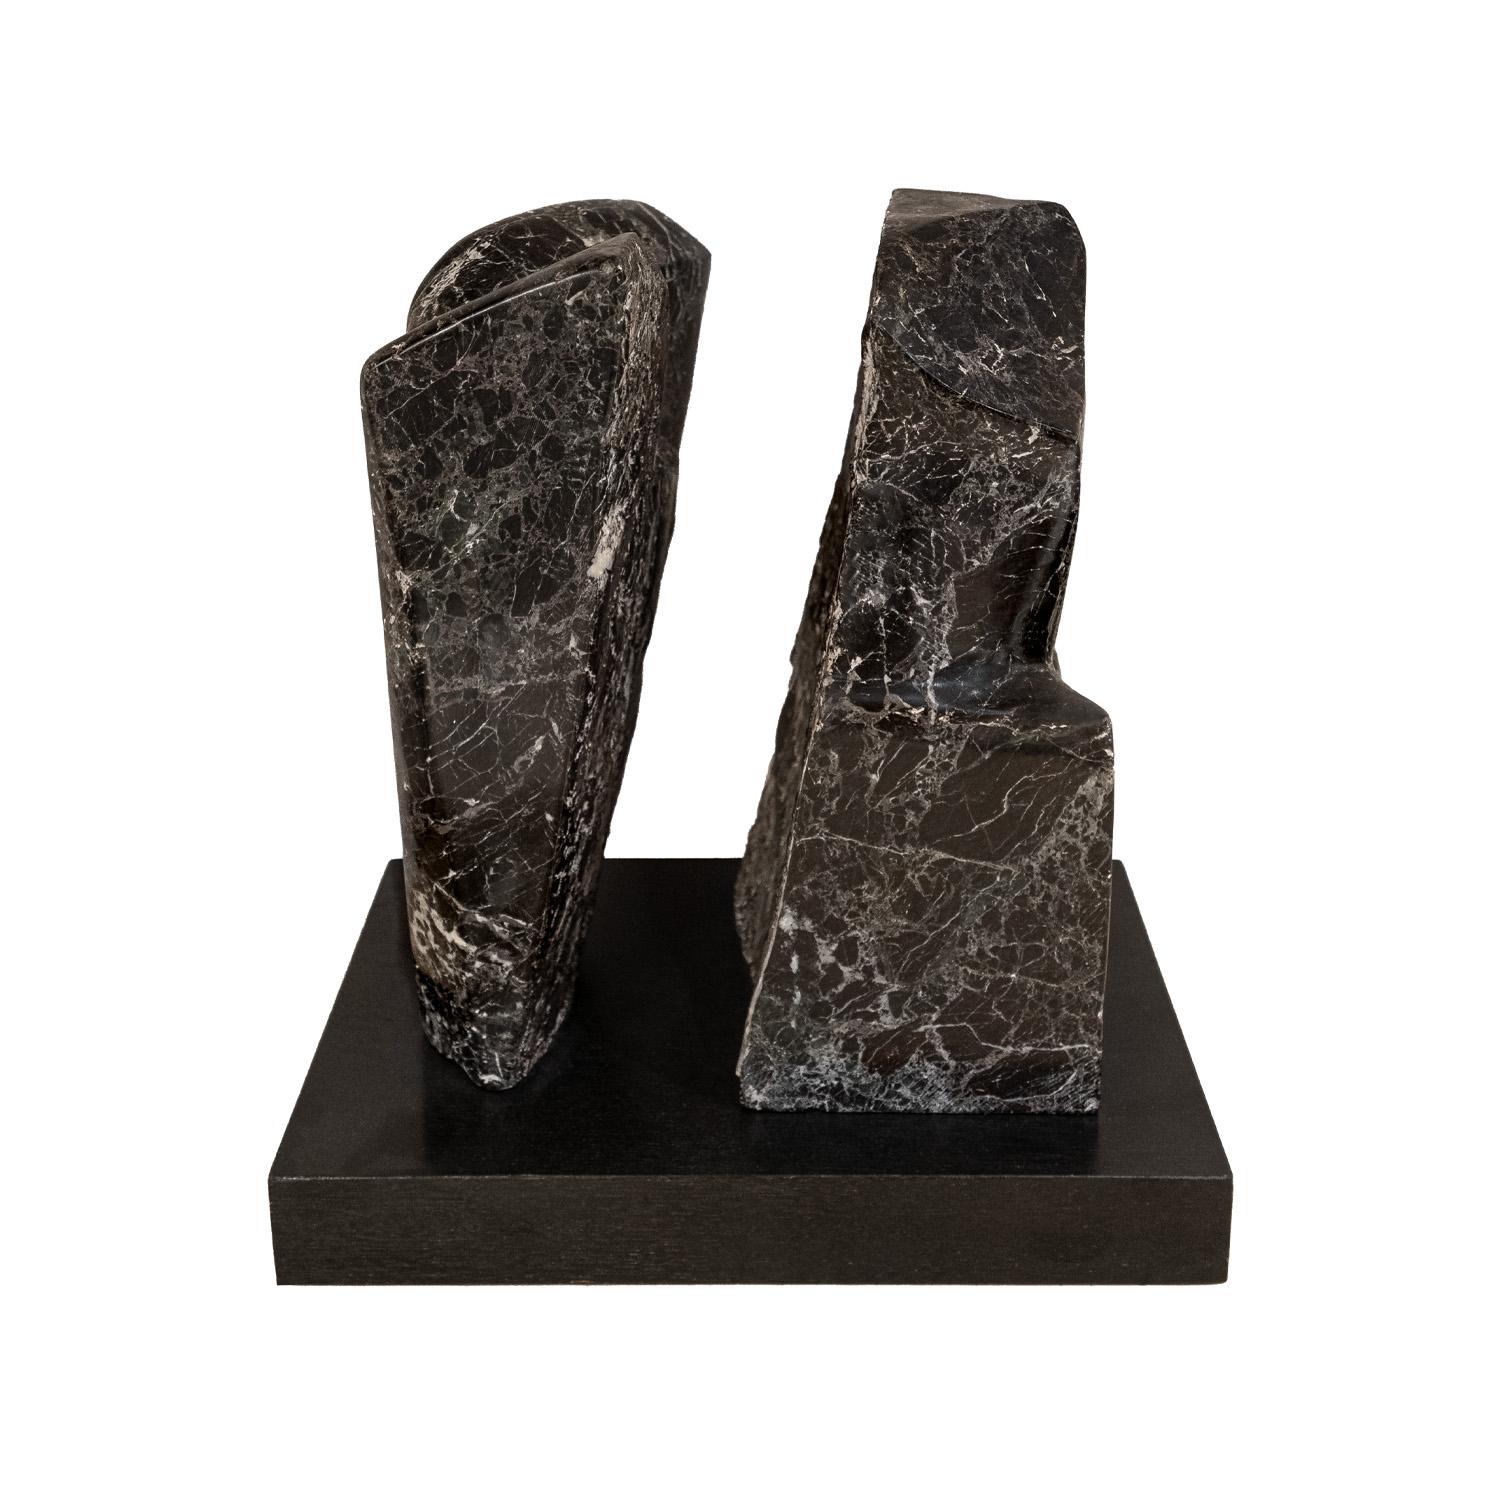 Extraordinary hand carved “Fractured Planet” sculpture in Italian Red Levanto marble on an ebonized wood base by Naomi Feinberg, American 1960’s.

Naomi Feinberg was a New York based sculptor who worked primarily in stone. She began sculpting in the